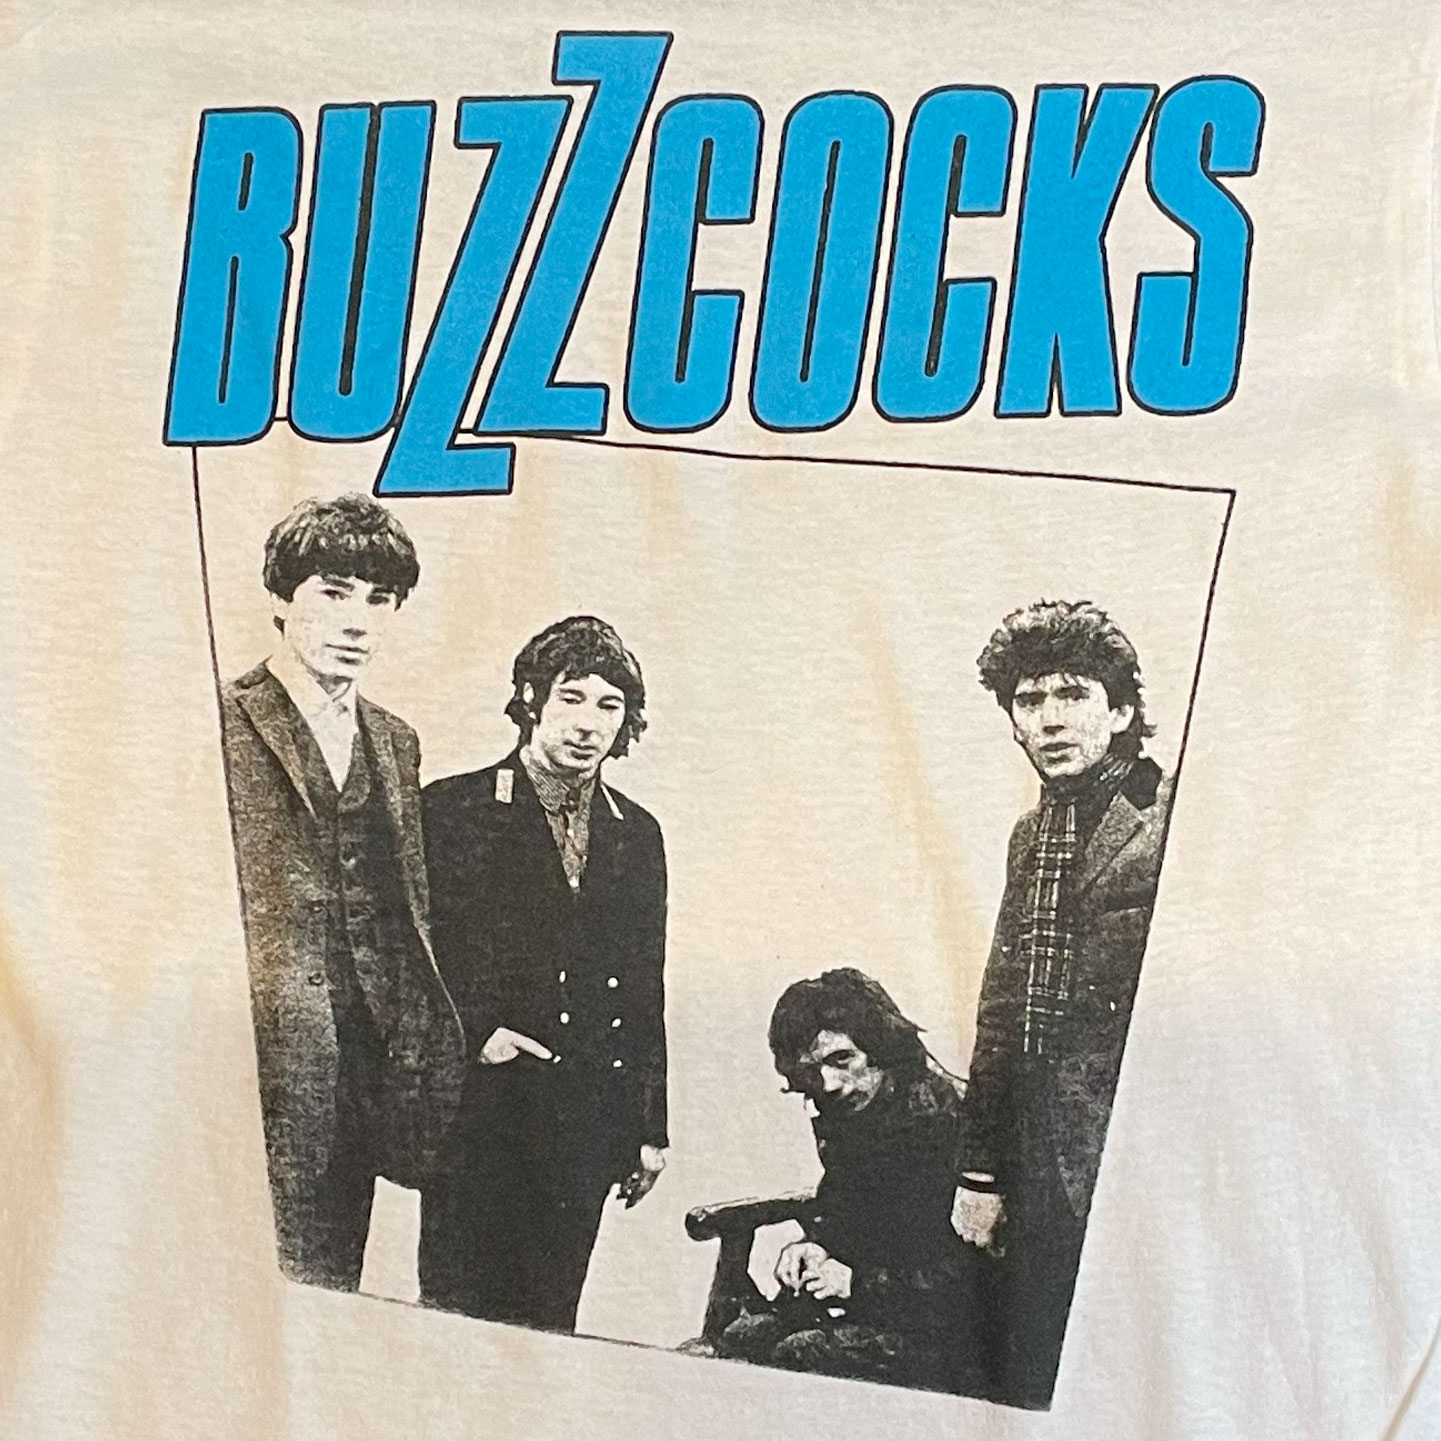 BUZZCOCKS Tシャツ WHAT DO I GET